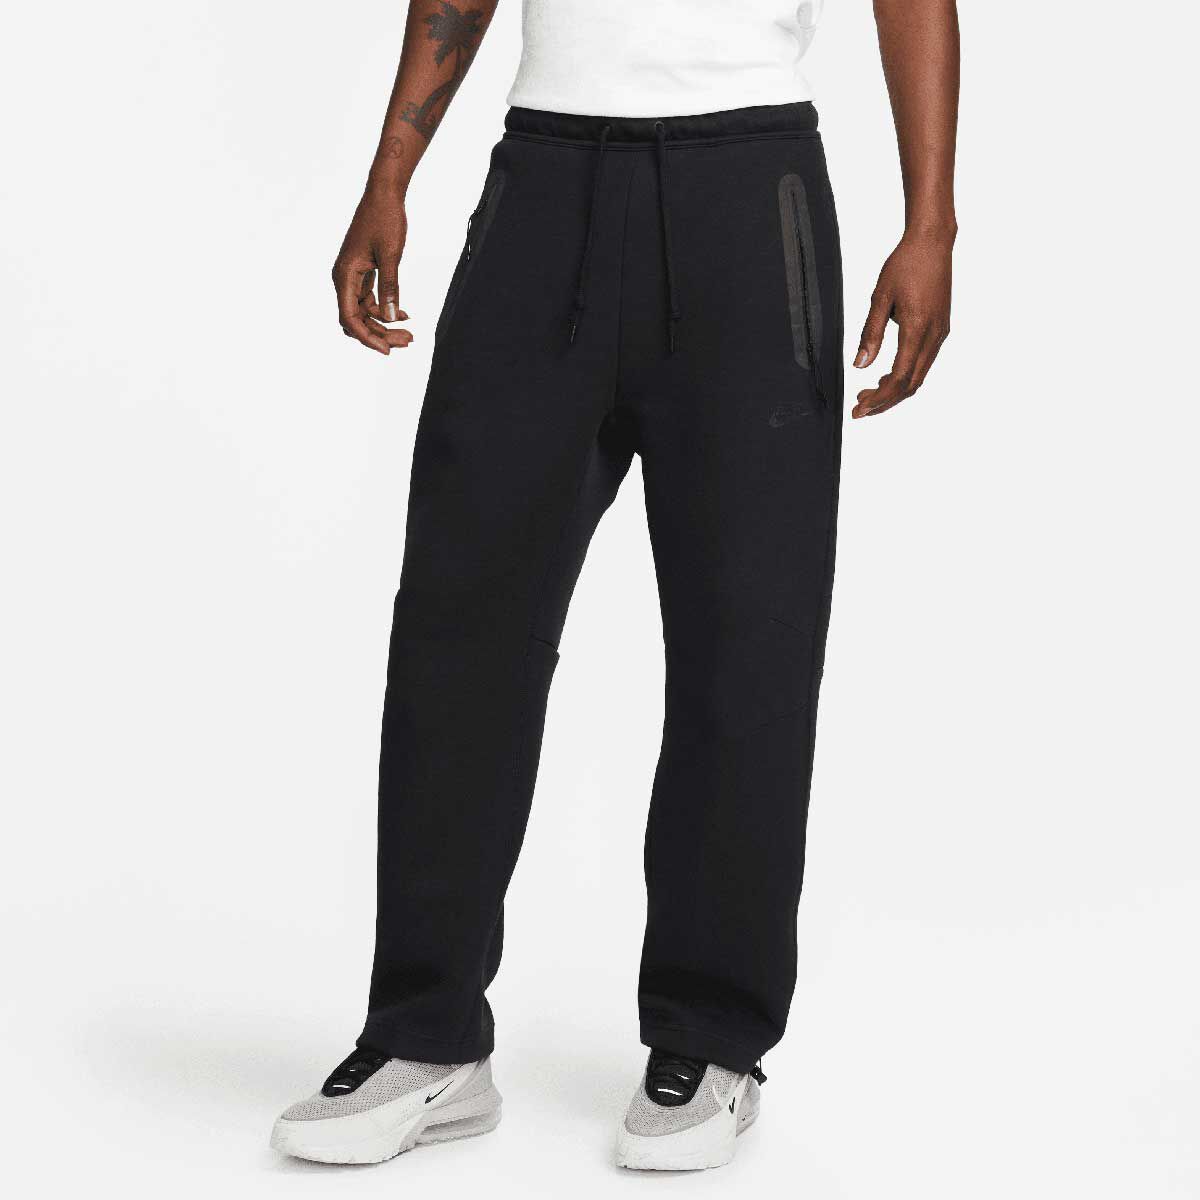 Men's Pants Sale Up to 40% Off | adidas US